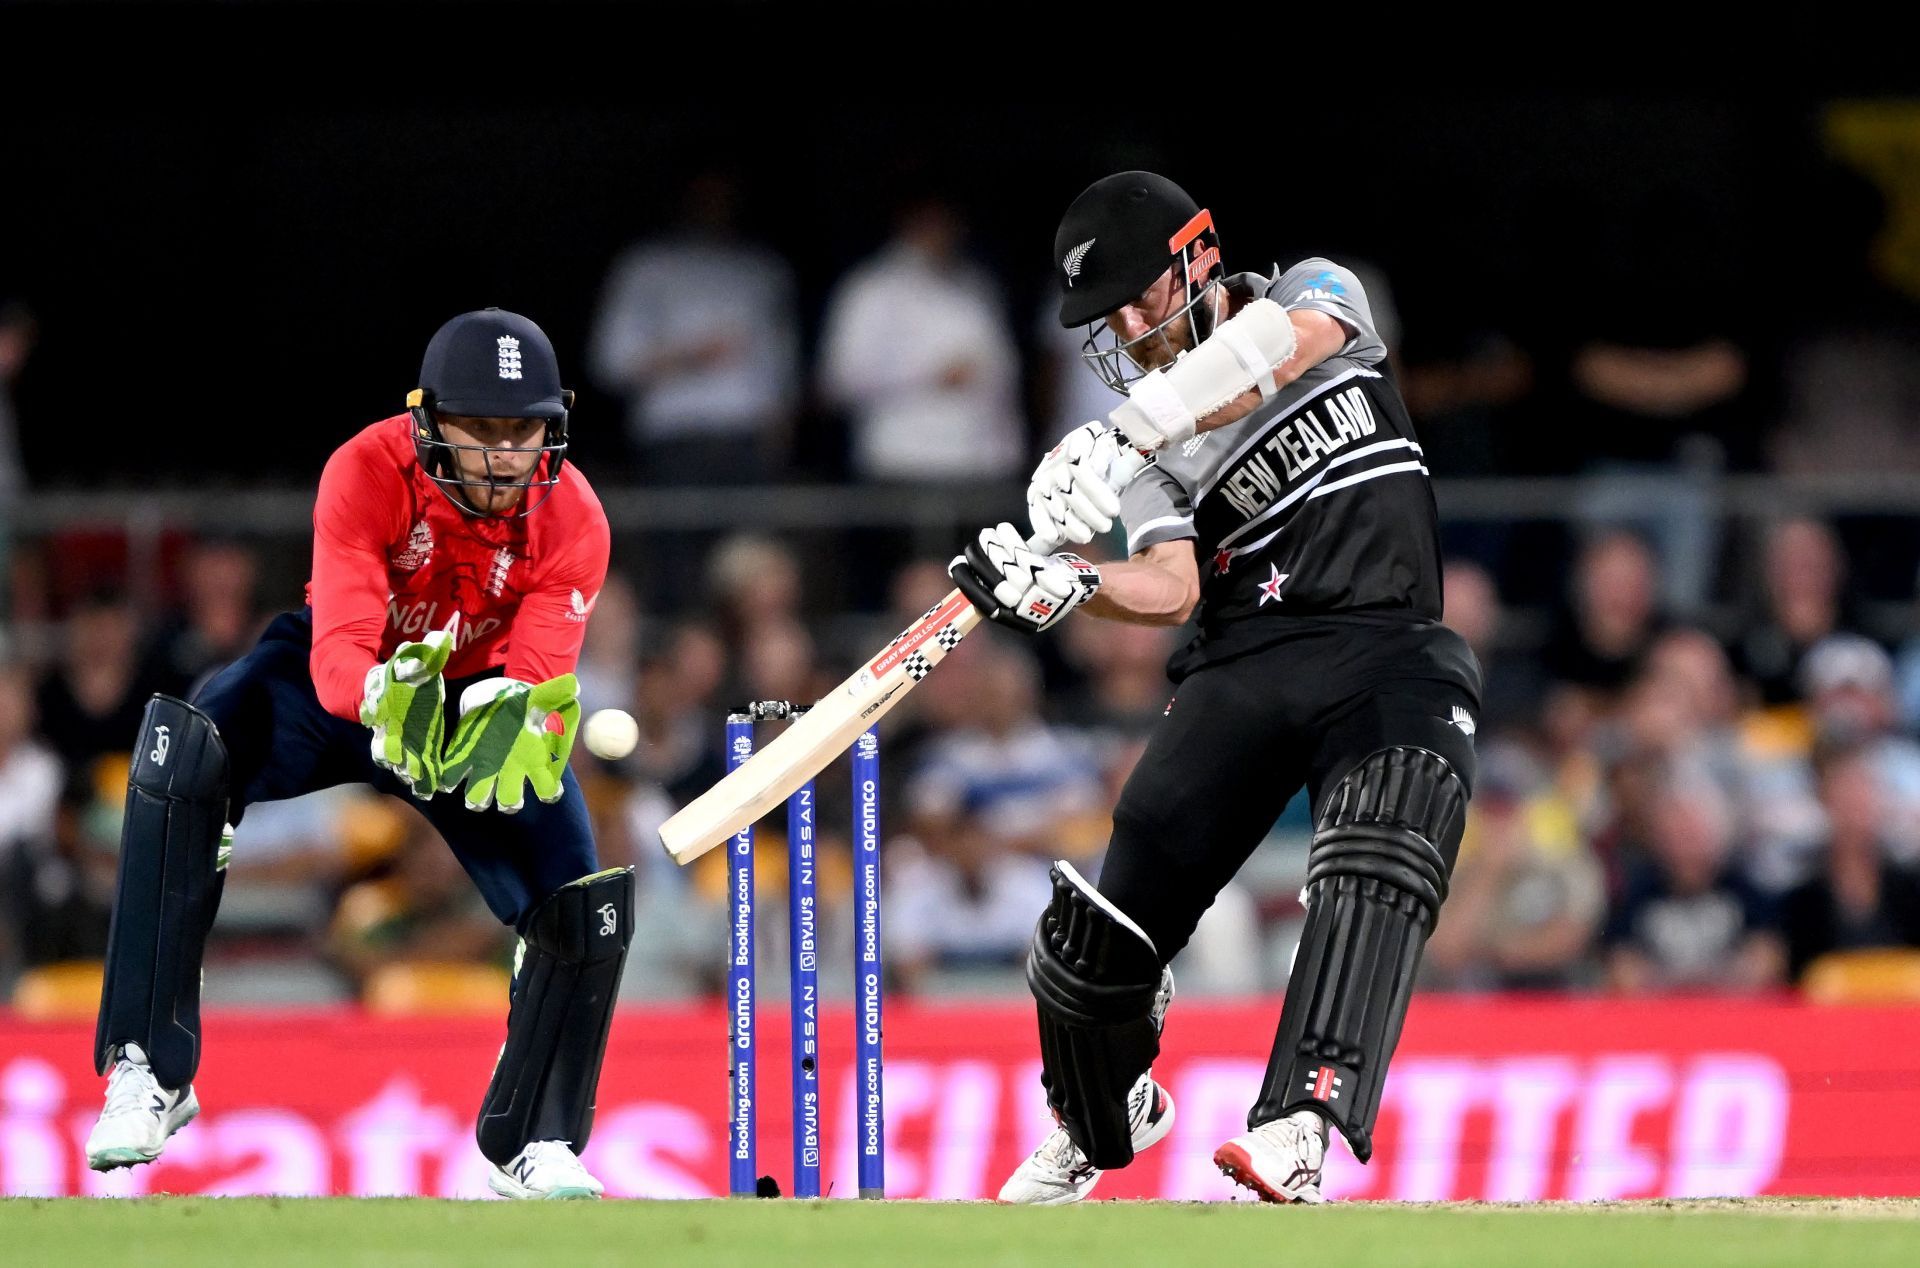 Kane Williamson in action against England. (Credits: Getty)